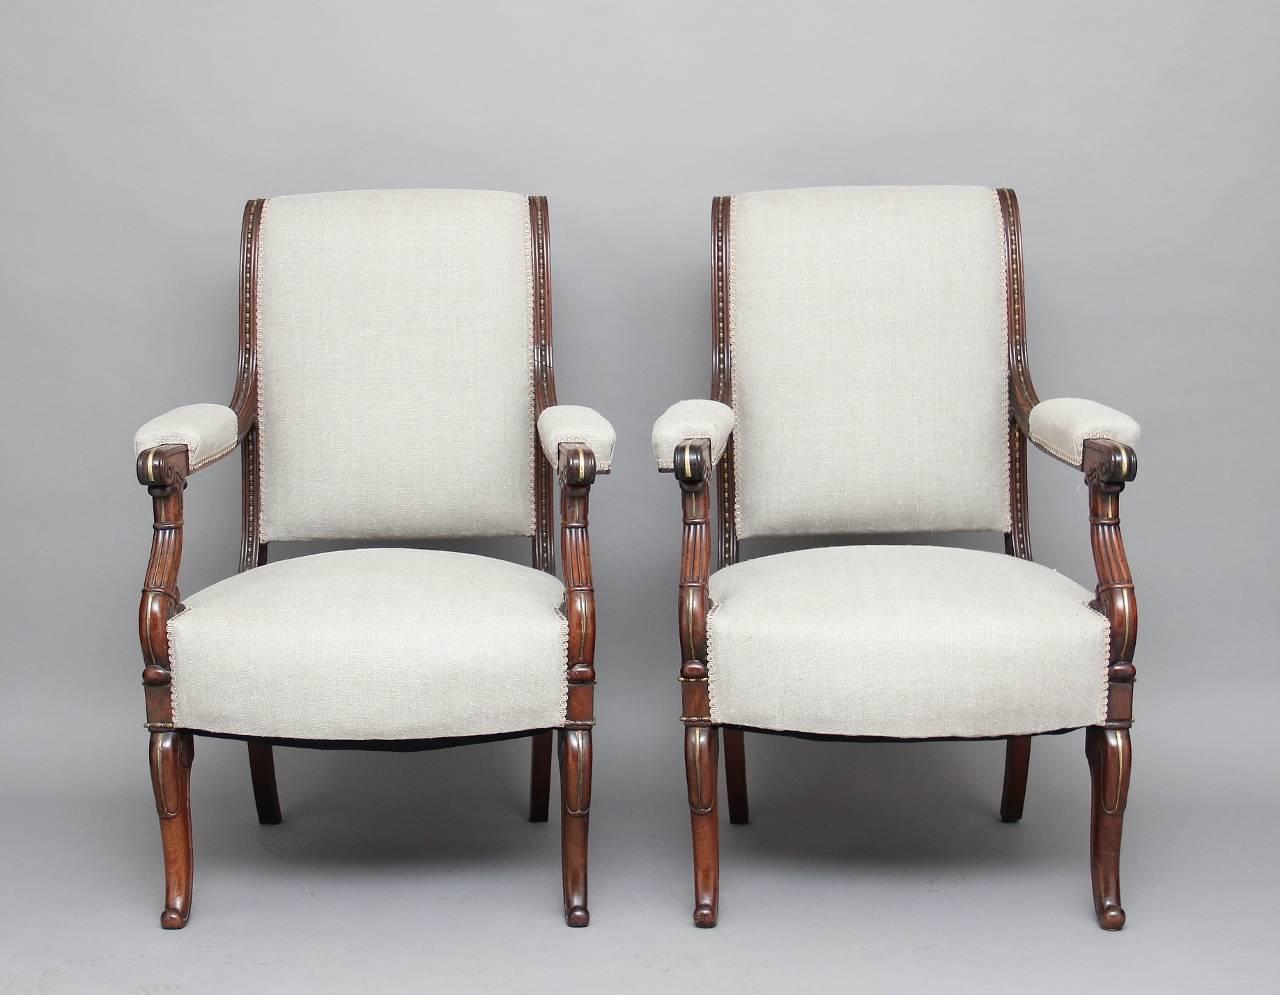 A remarkable and unusual pair of early 19th century French rosewood and brass inlaid armchairs, upholstered in a grey linen fabric, with a shaped and scrolled back, the padded arms with carved and readed supports with nice scroll decoration,